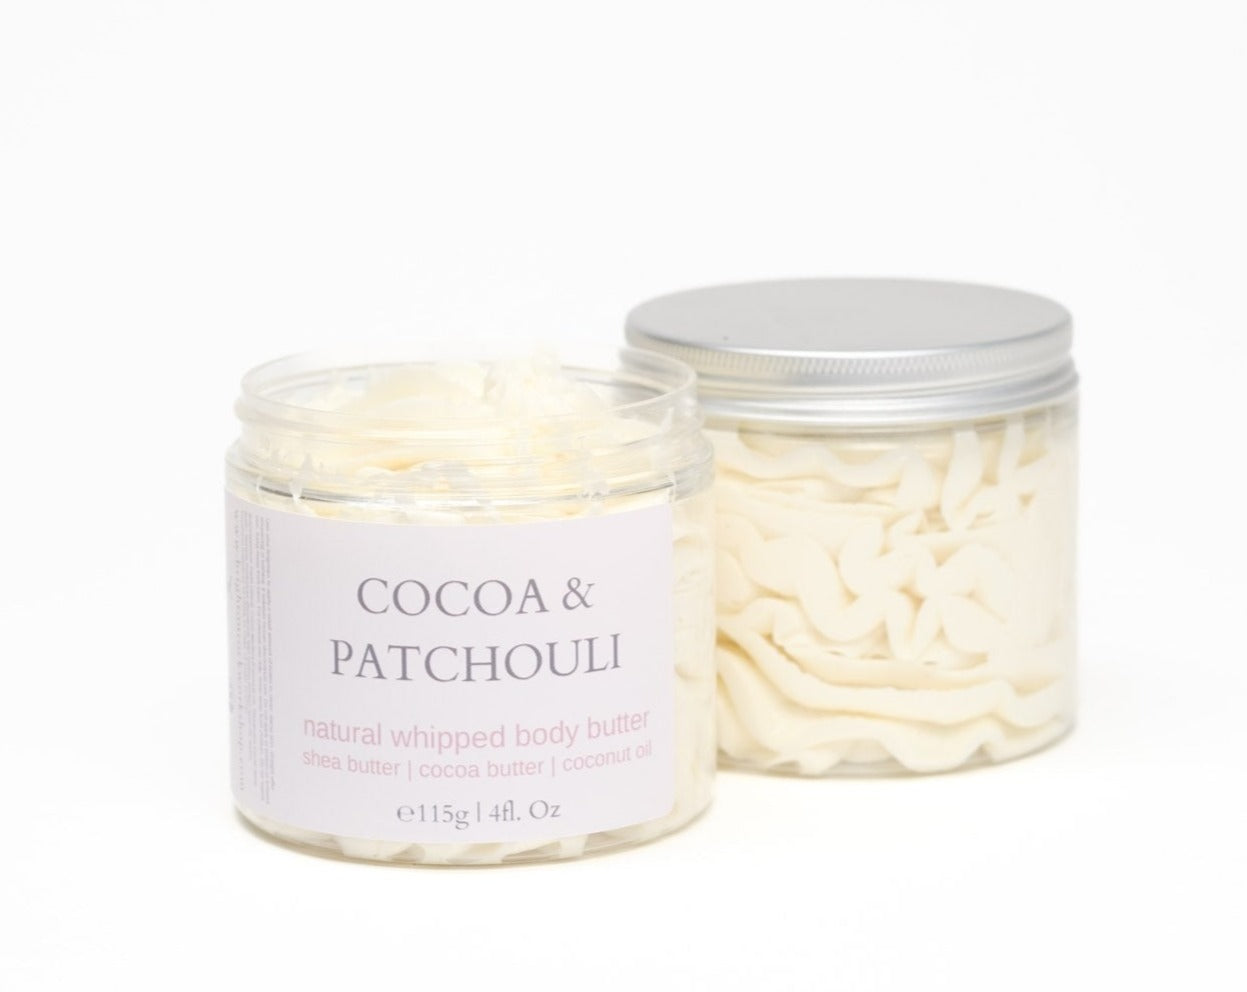 Brighton Rock Workshop's Cocoa & patchouli natural whipped body butter made from natural shea, cocoa butter, and coconut oil. Non greasy nourishing butter for soft skin. Handmade in the UK. Vegan, cruelty free, natural skincare